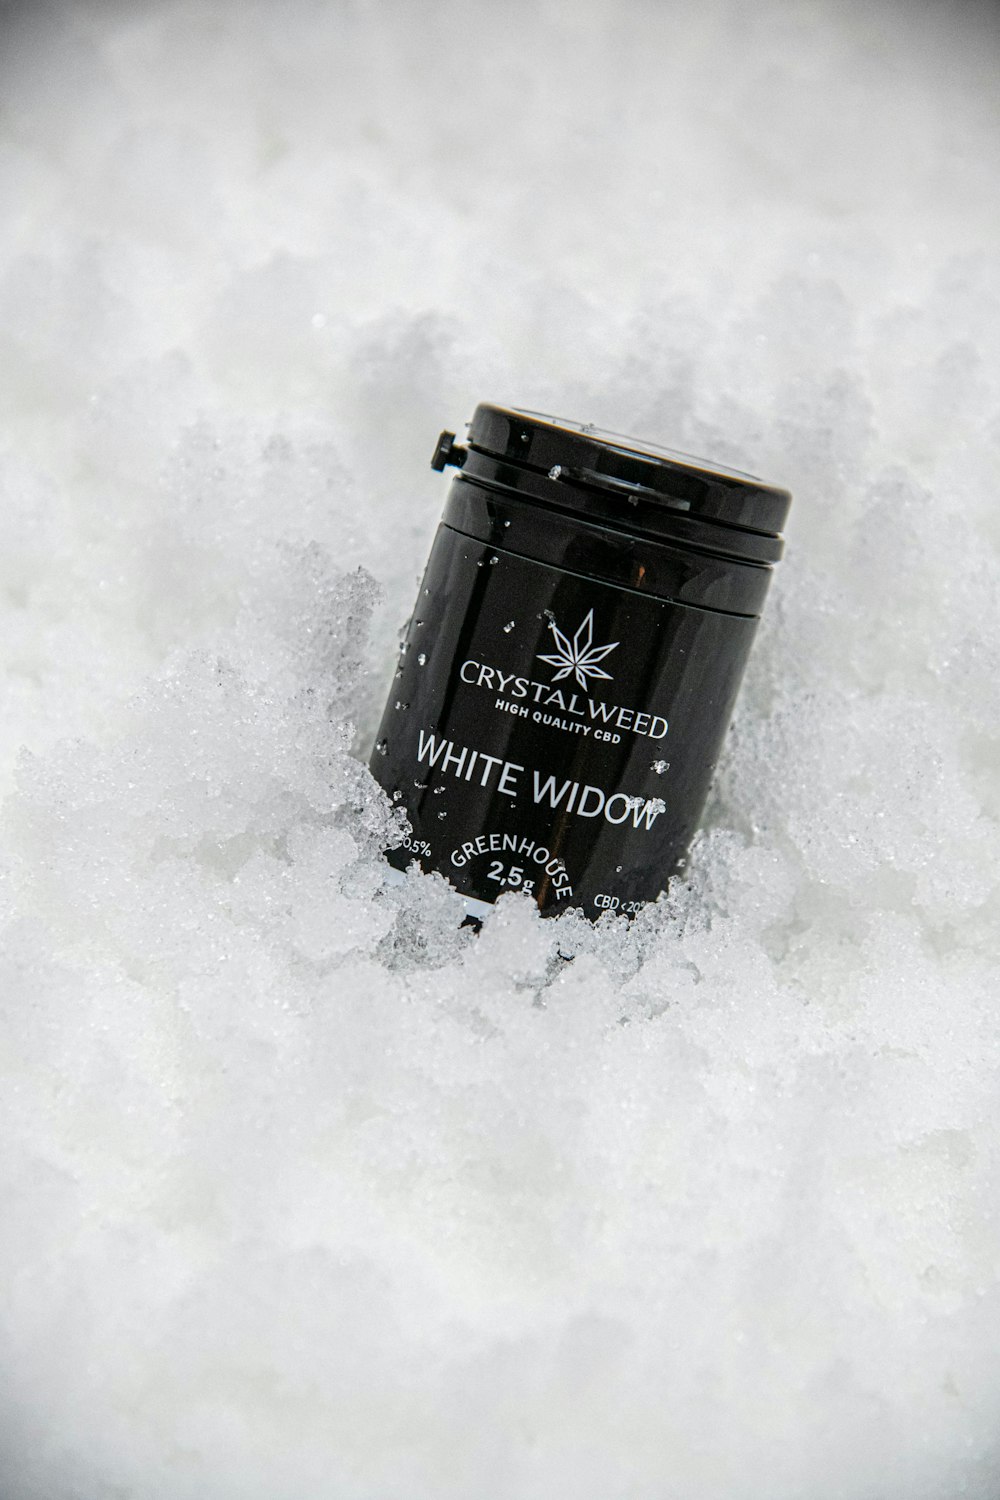 a can of white widow in the snow